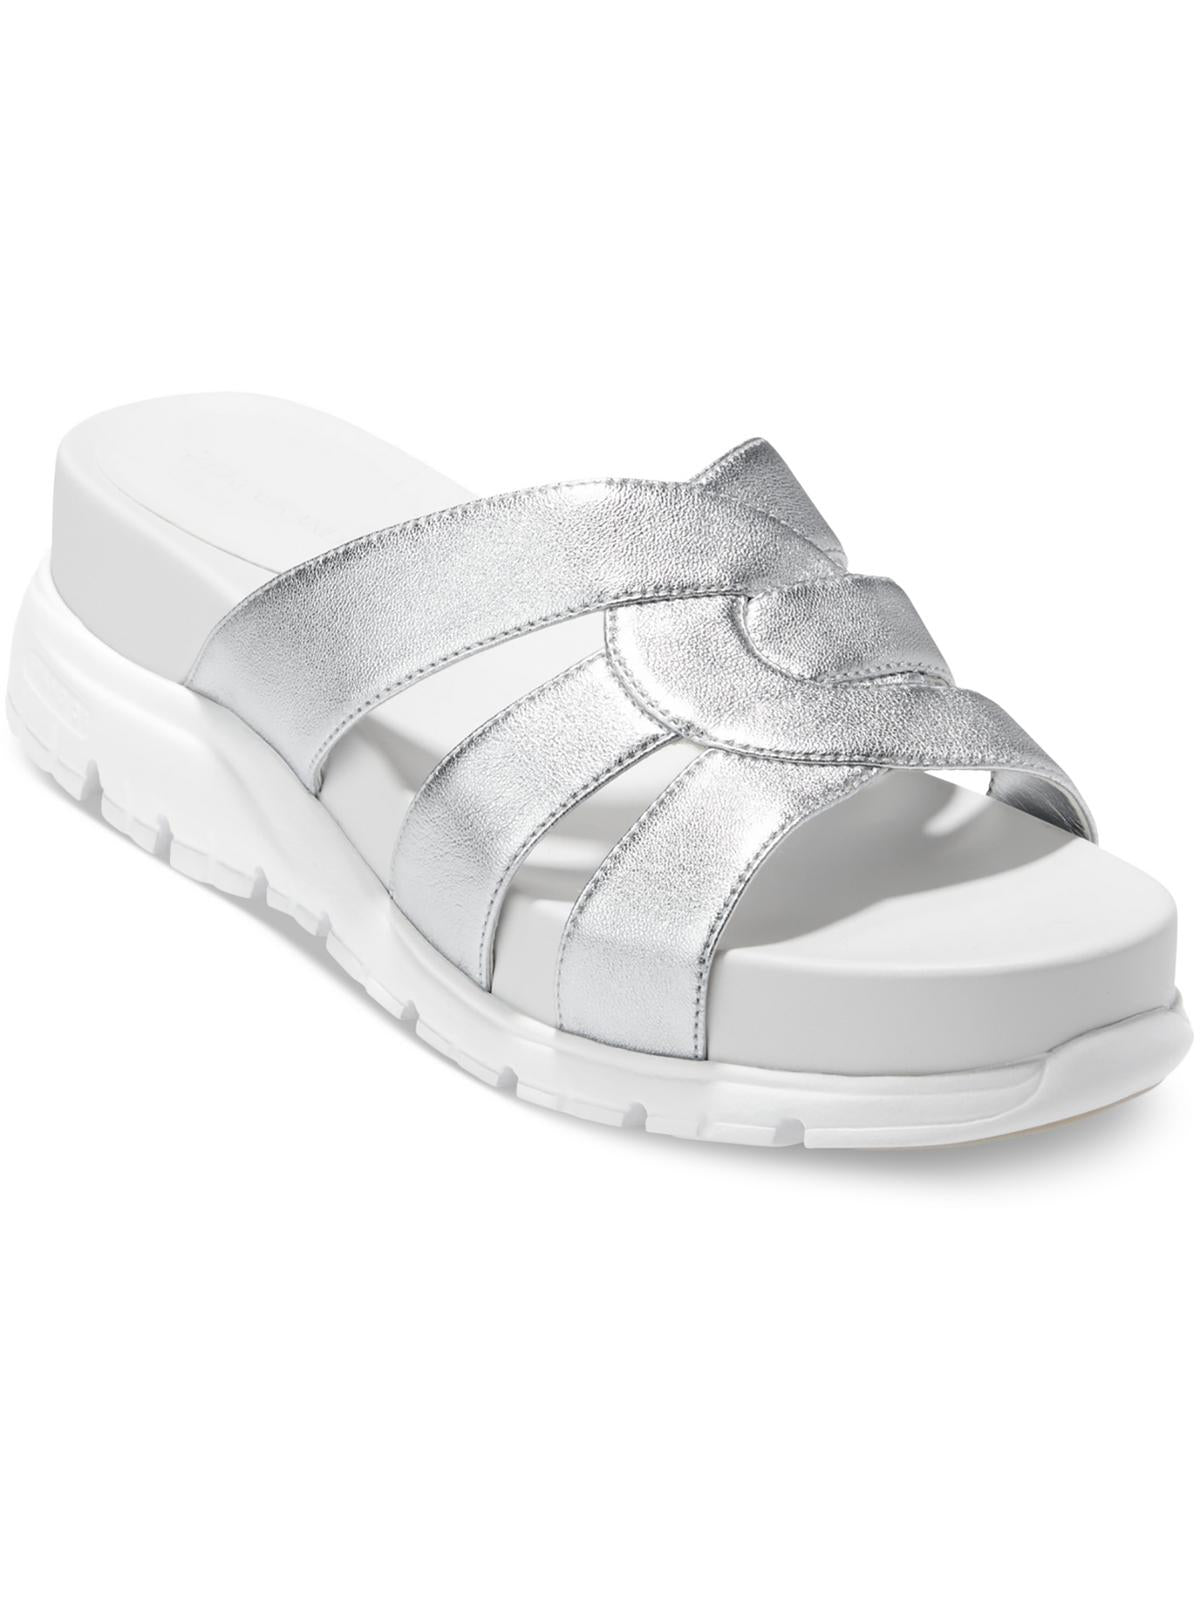 Zerogrand Cole Haan Zg Slotted Slide Womens D Faux Leather Slide Sandals In Silver